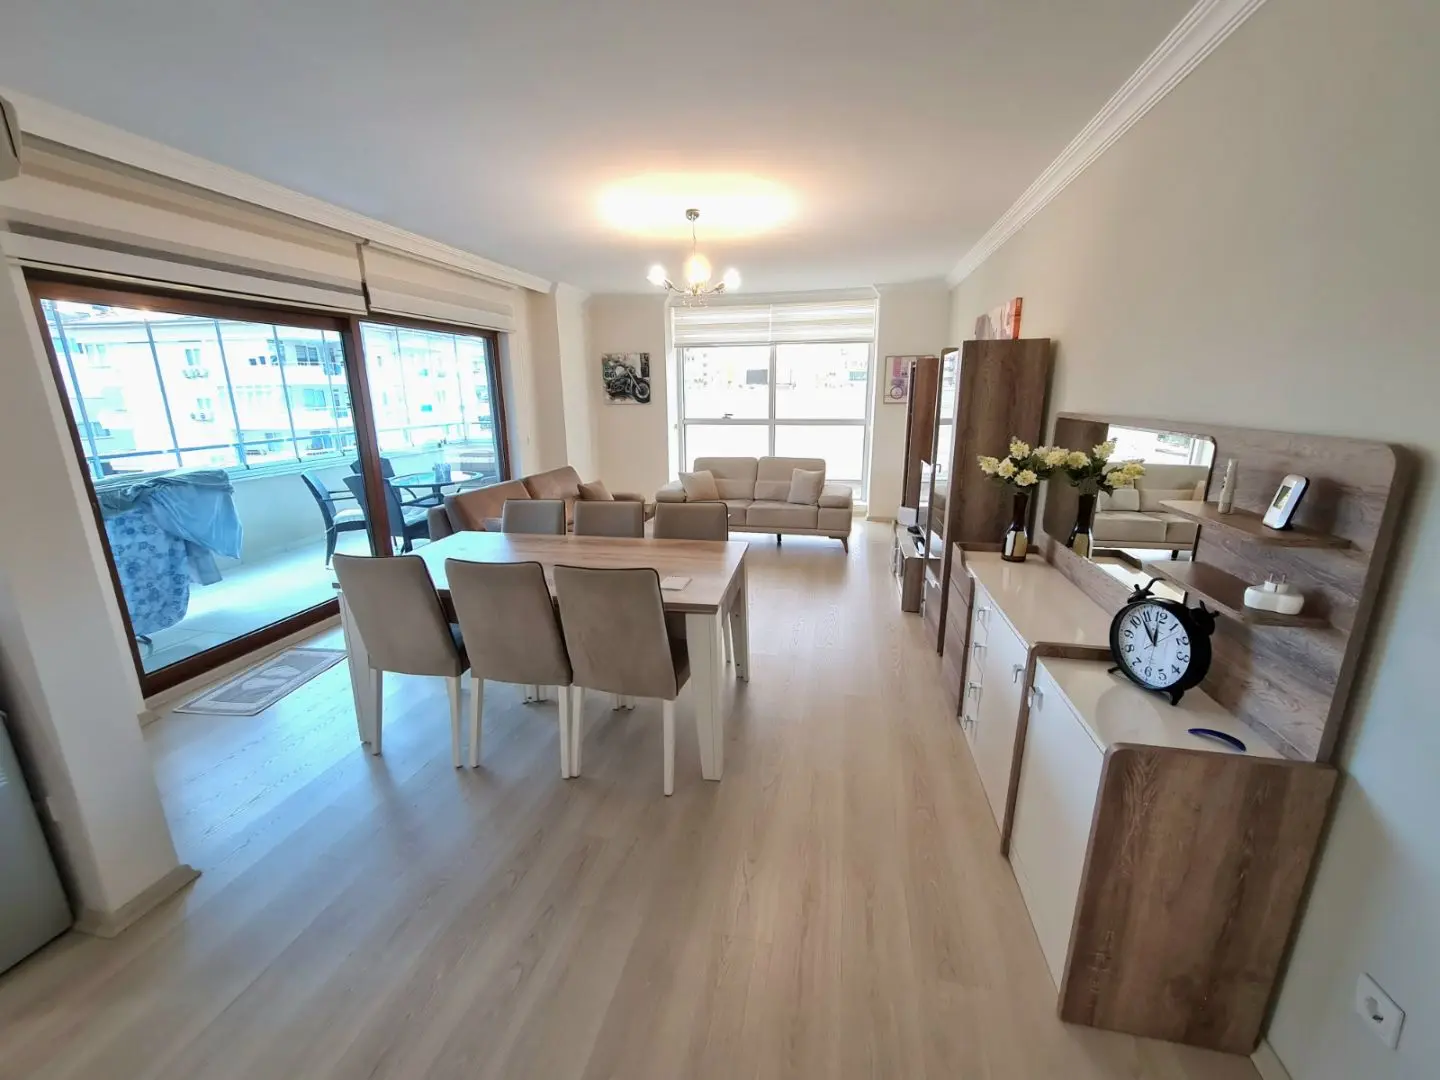 FULLY FURNISHED SPACIOUS 2+1 APARTMENT IN ALANYA, OBA